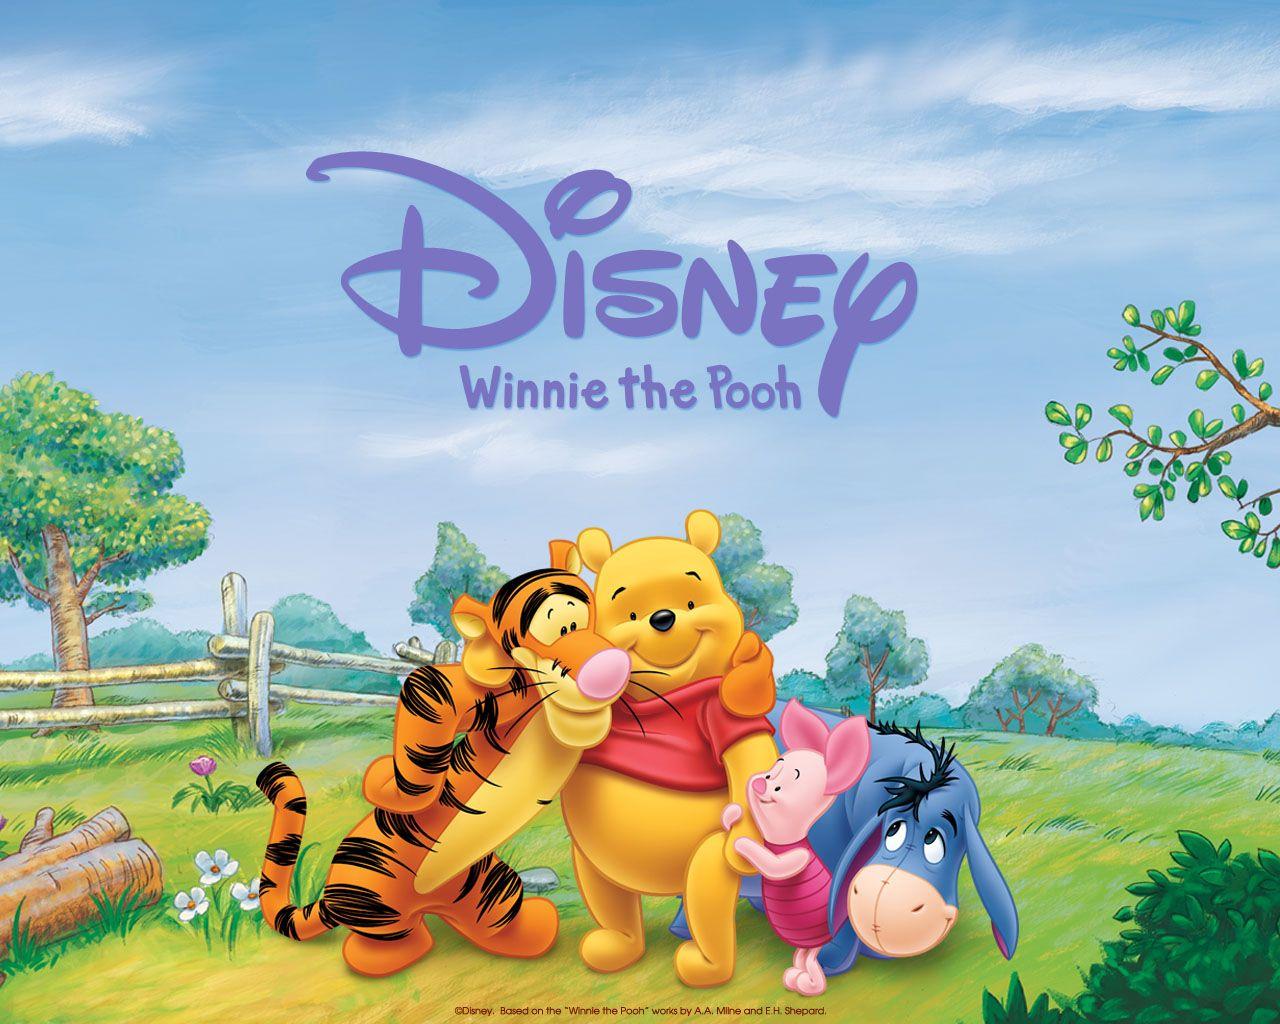 Disney Winnie the Pooh Wallpaper for PC